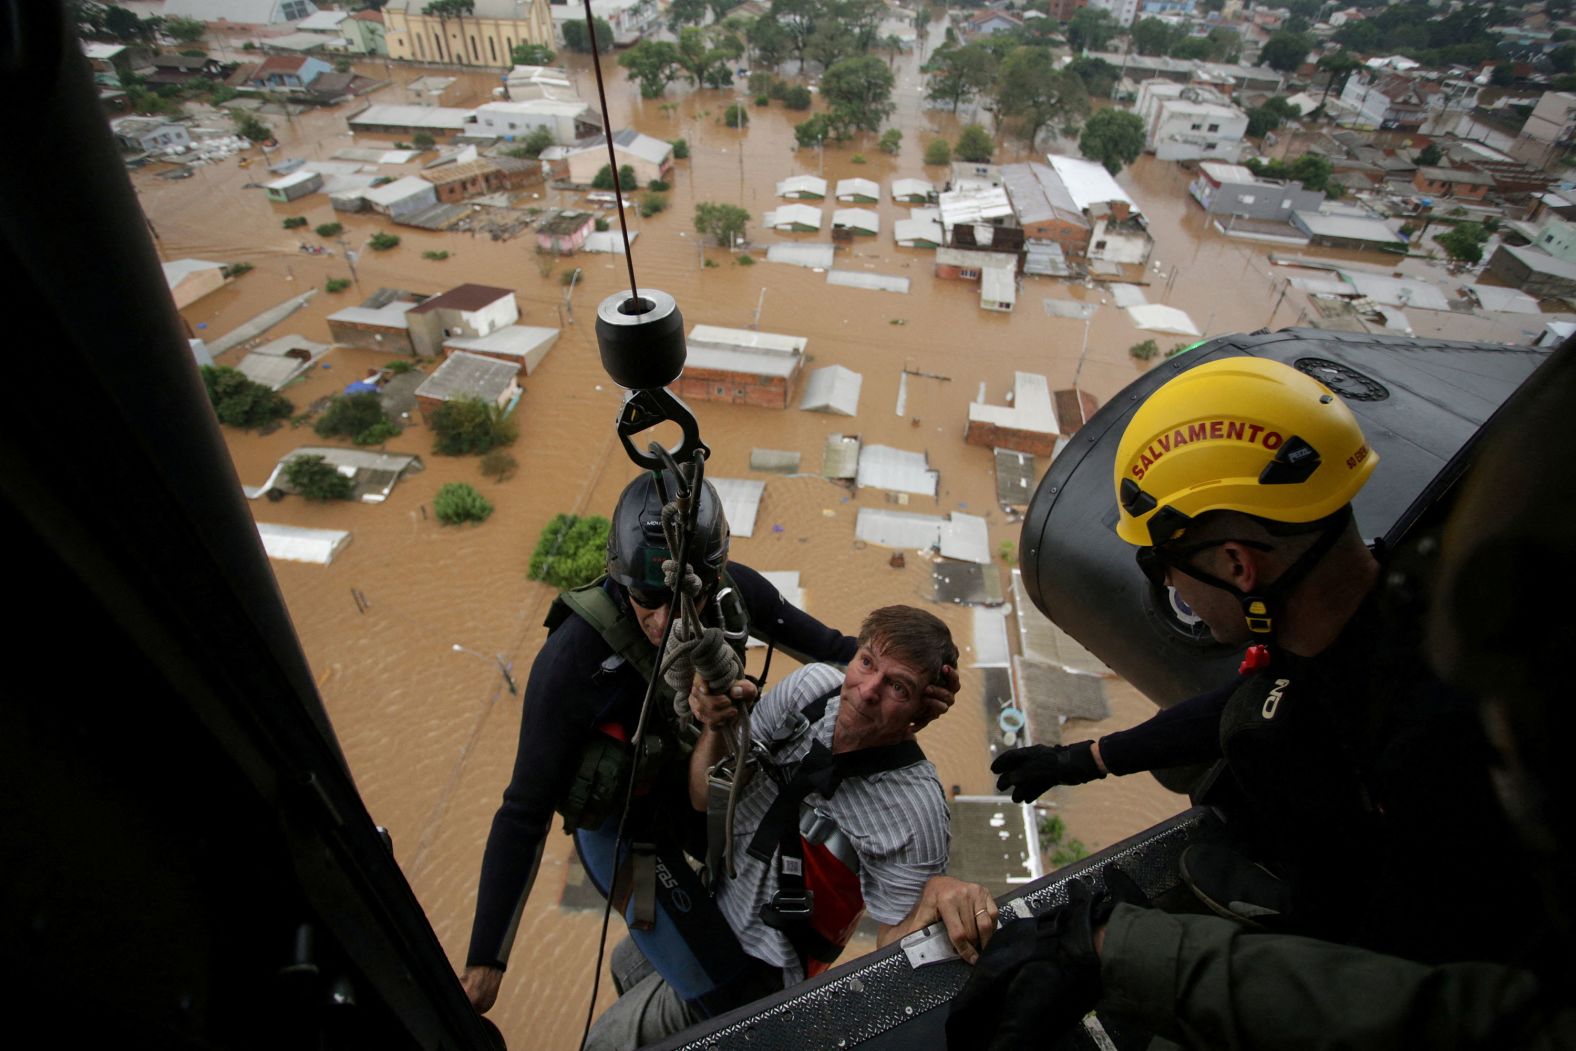 A man is rescued by military firefighters after flooding in Canoas, Brazil, on Saturday, May 4. At least 95 people have died in the<a href="index.php?page=&url=https%3A%2F%2Fwww.cnn.com%2F2024%2F05%2F08%2Fweather%2Fbrazil-flooding-satellite-imagery-intl%2Findex.html" target="_blank"> heavy rainfall and floods</a> that have torn through the state of Rio Grande do Sul, where storms have affected more than 1 million people in 385 municipalities, according to the civil defense.